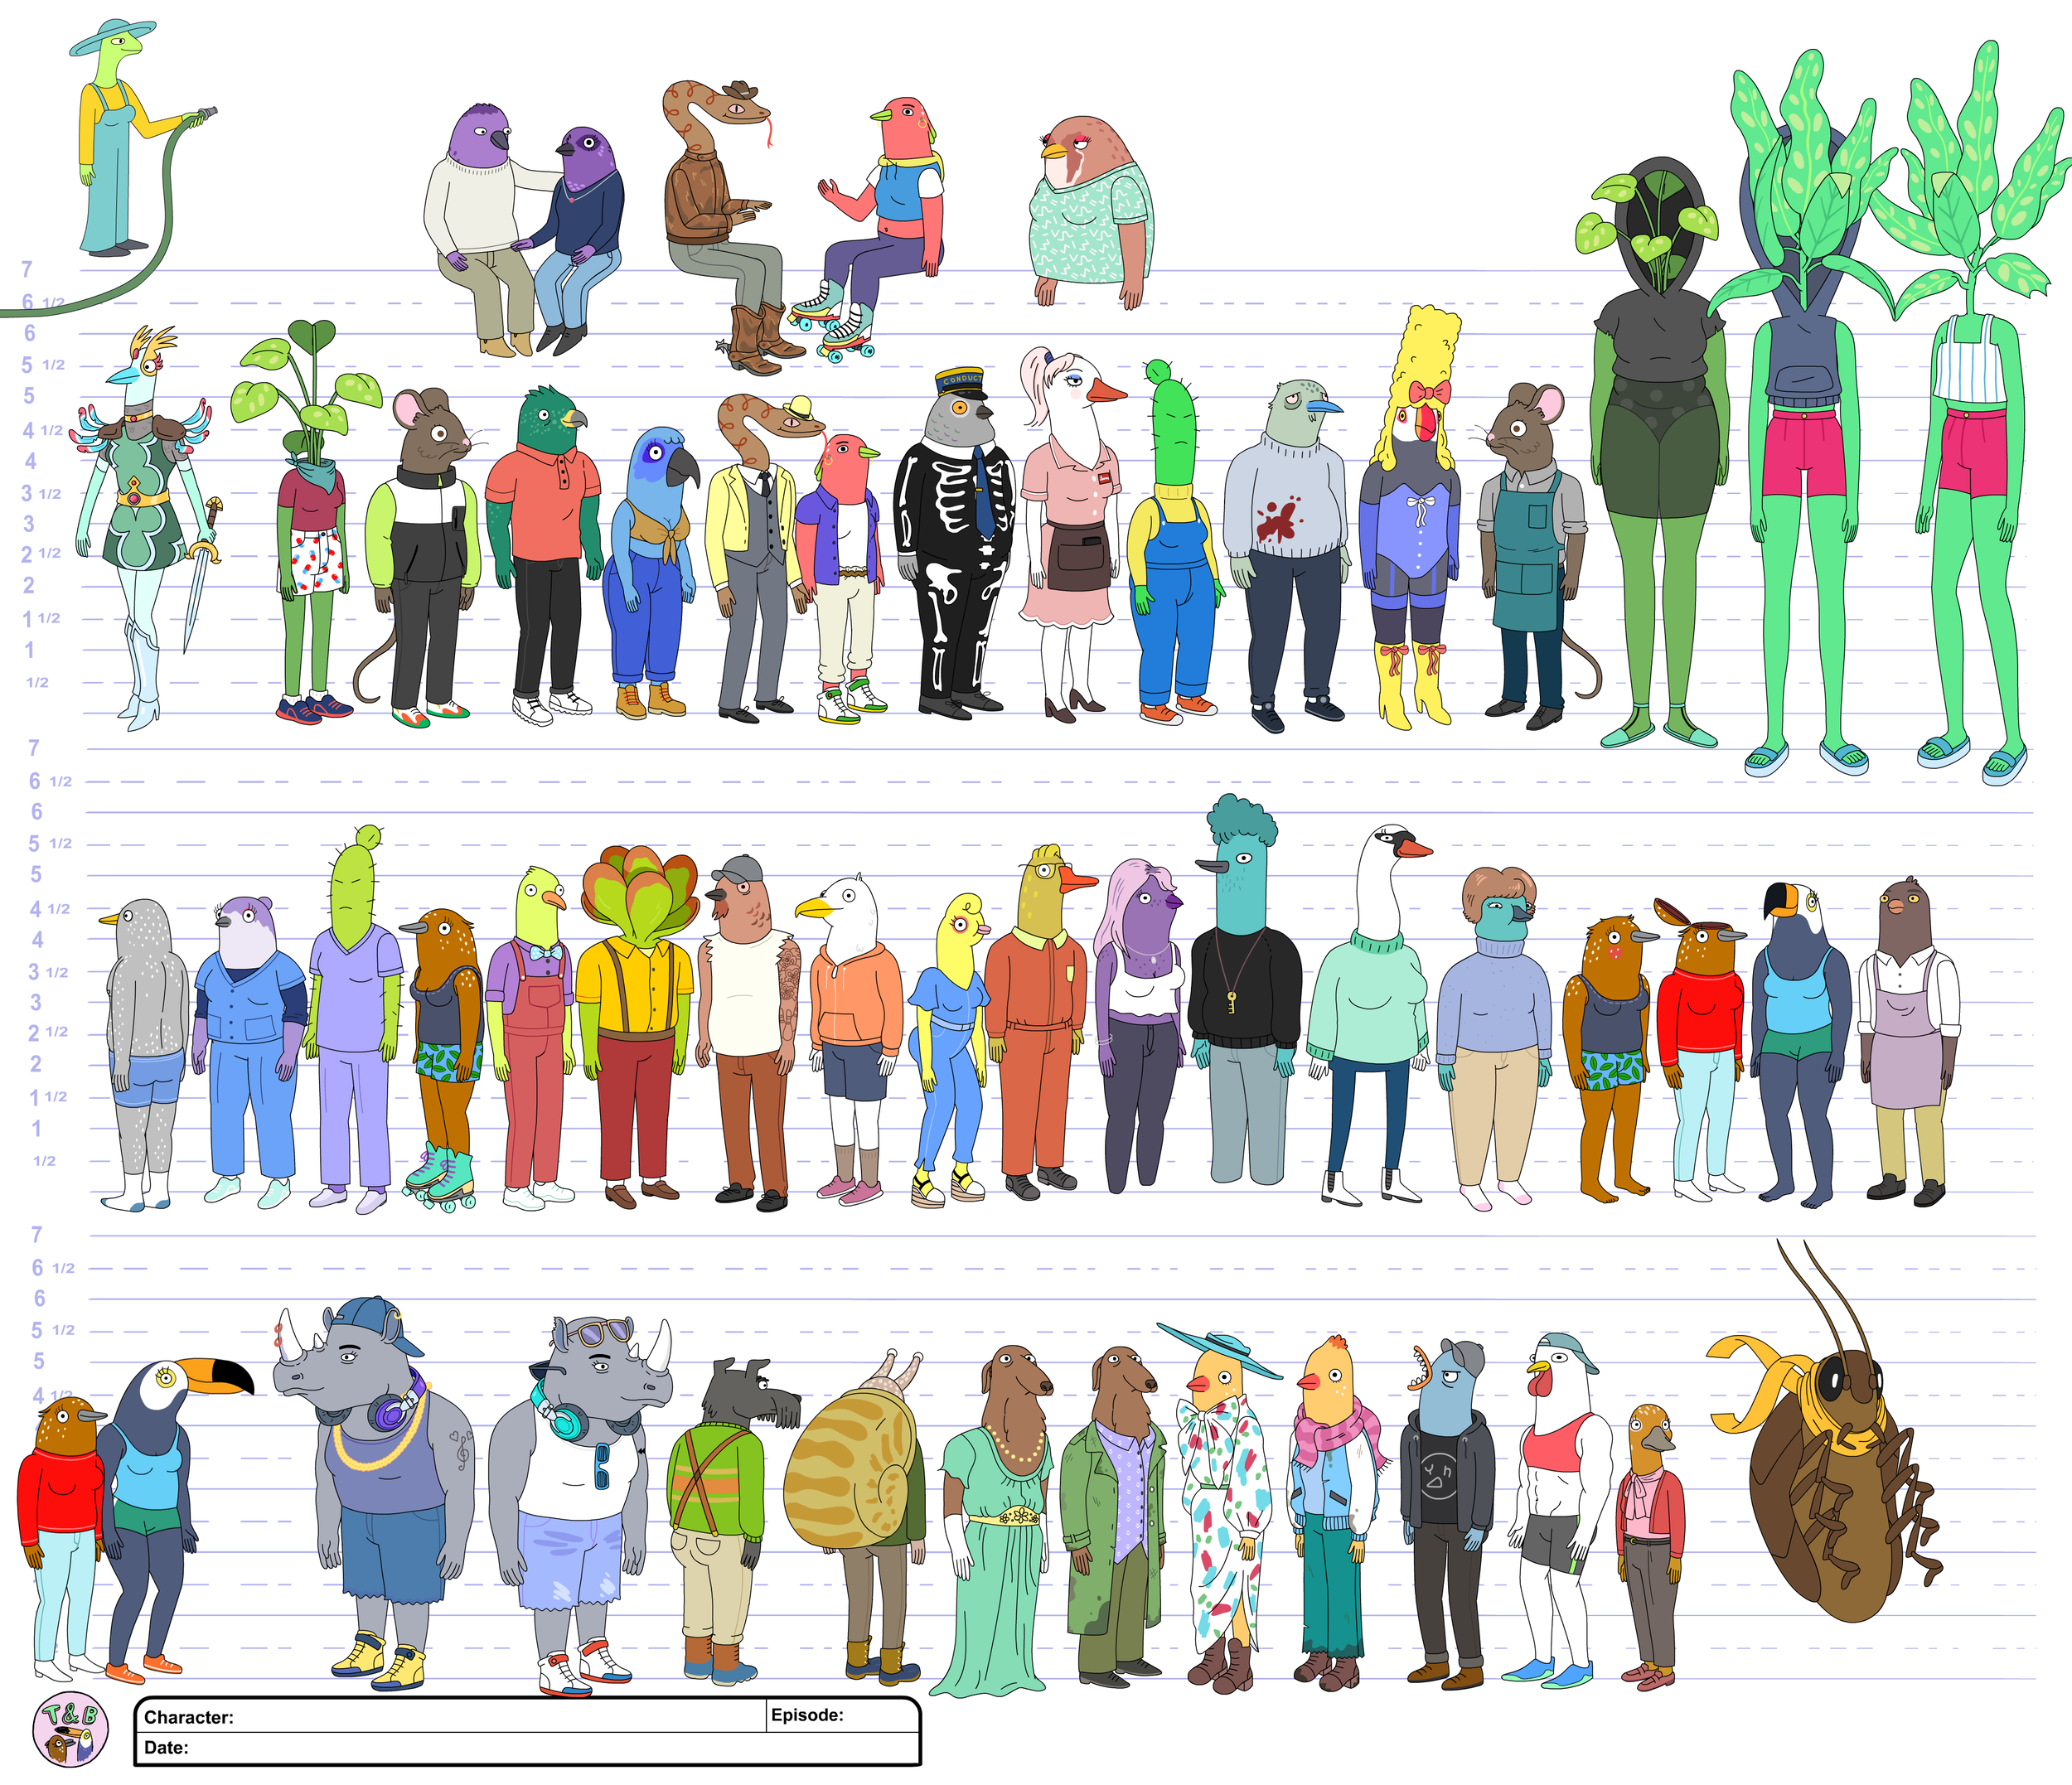 A selection of characters designed by Anthony Gobeille for Tuca & Bertie season 02